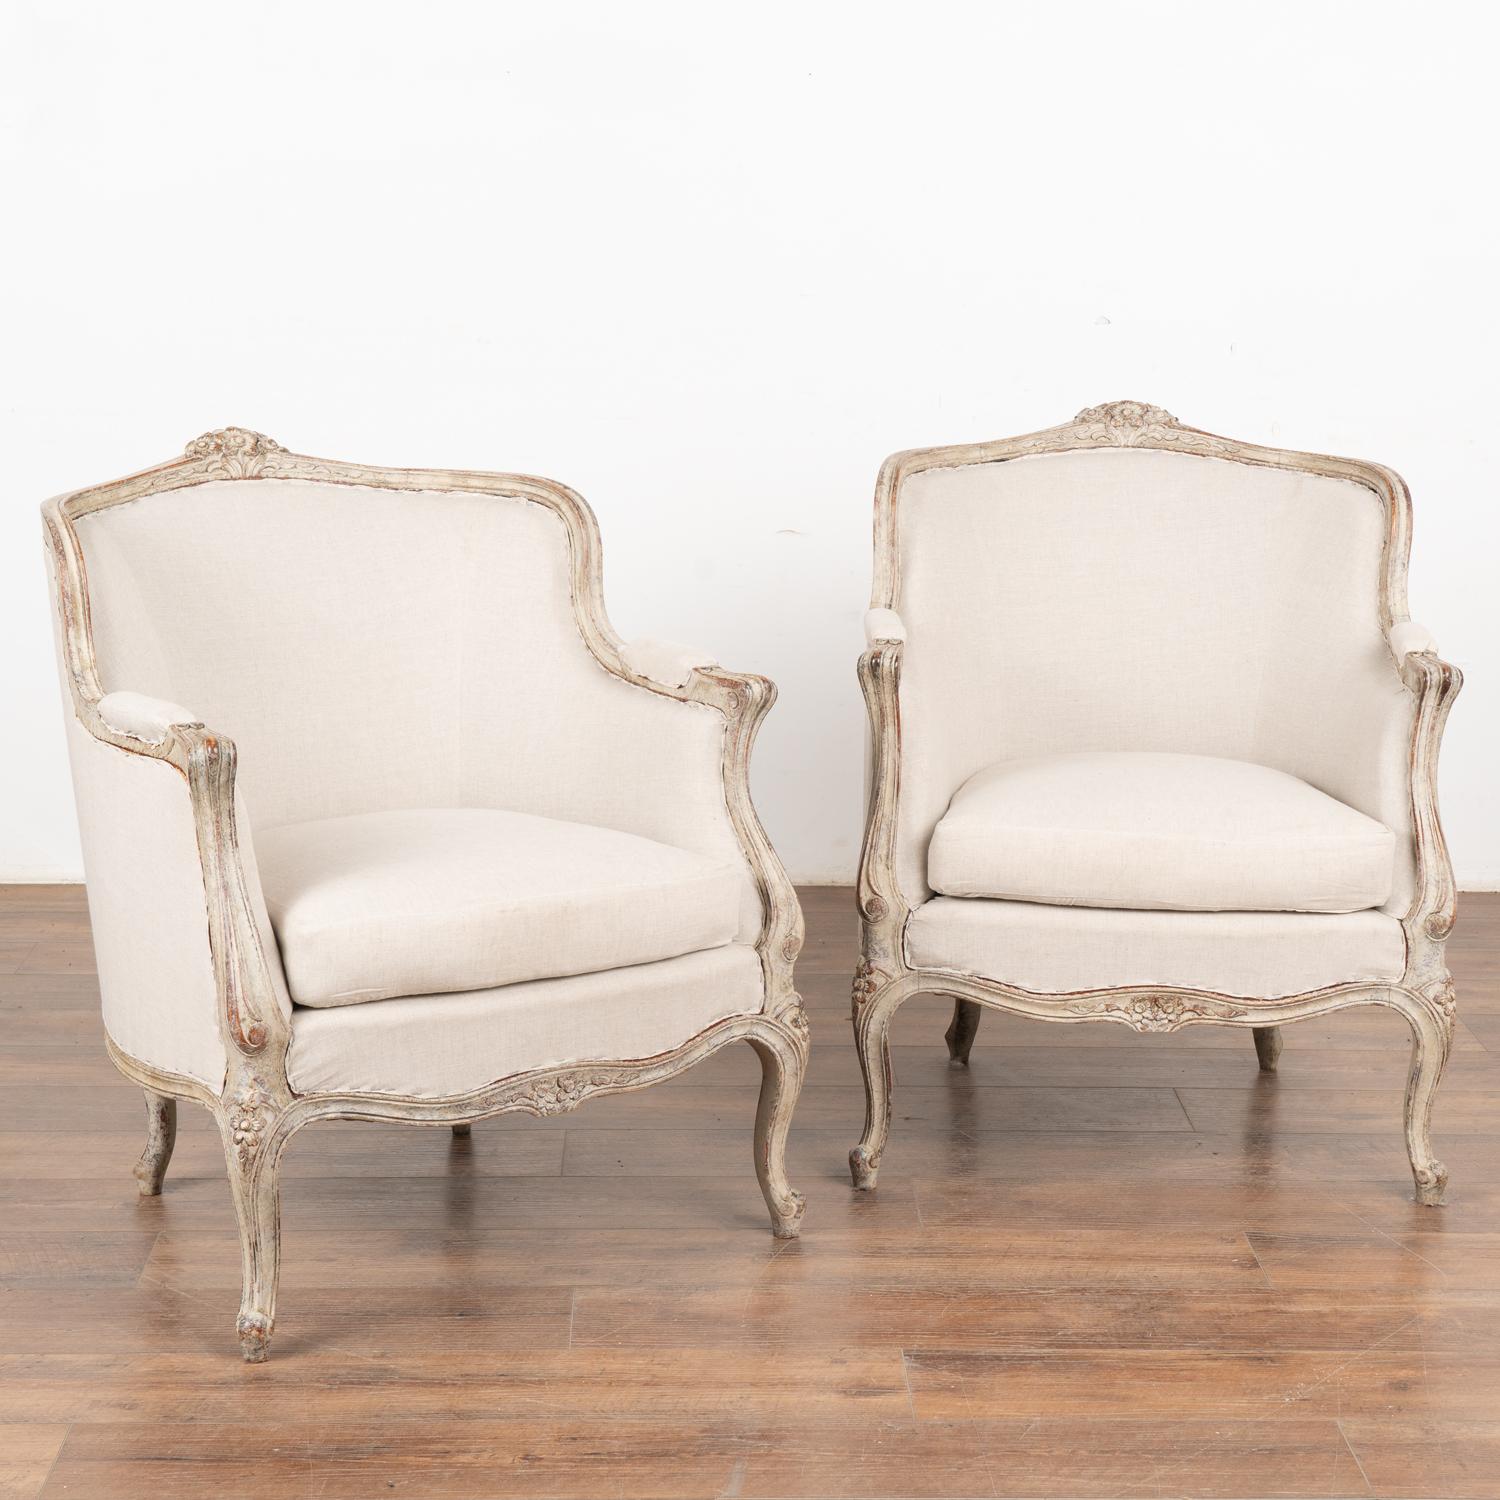 This pair of Swedish arm chairs have a gently curved back, cabriolet legs and decorative carving embellish the skirt and top which all add to the graceful appeal of each.
The newer professionally applied antique white layered painted finish has been